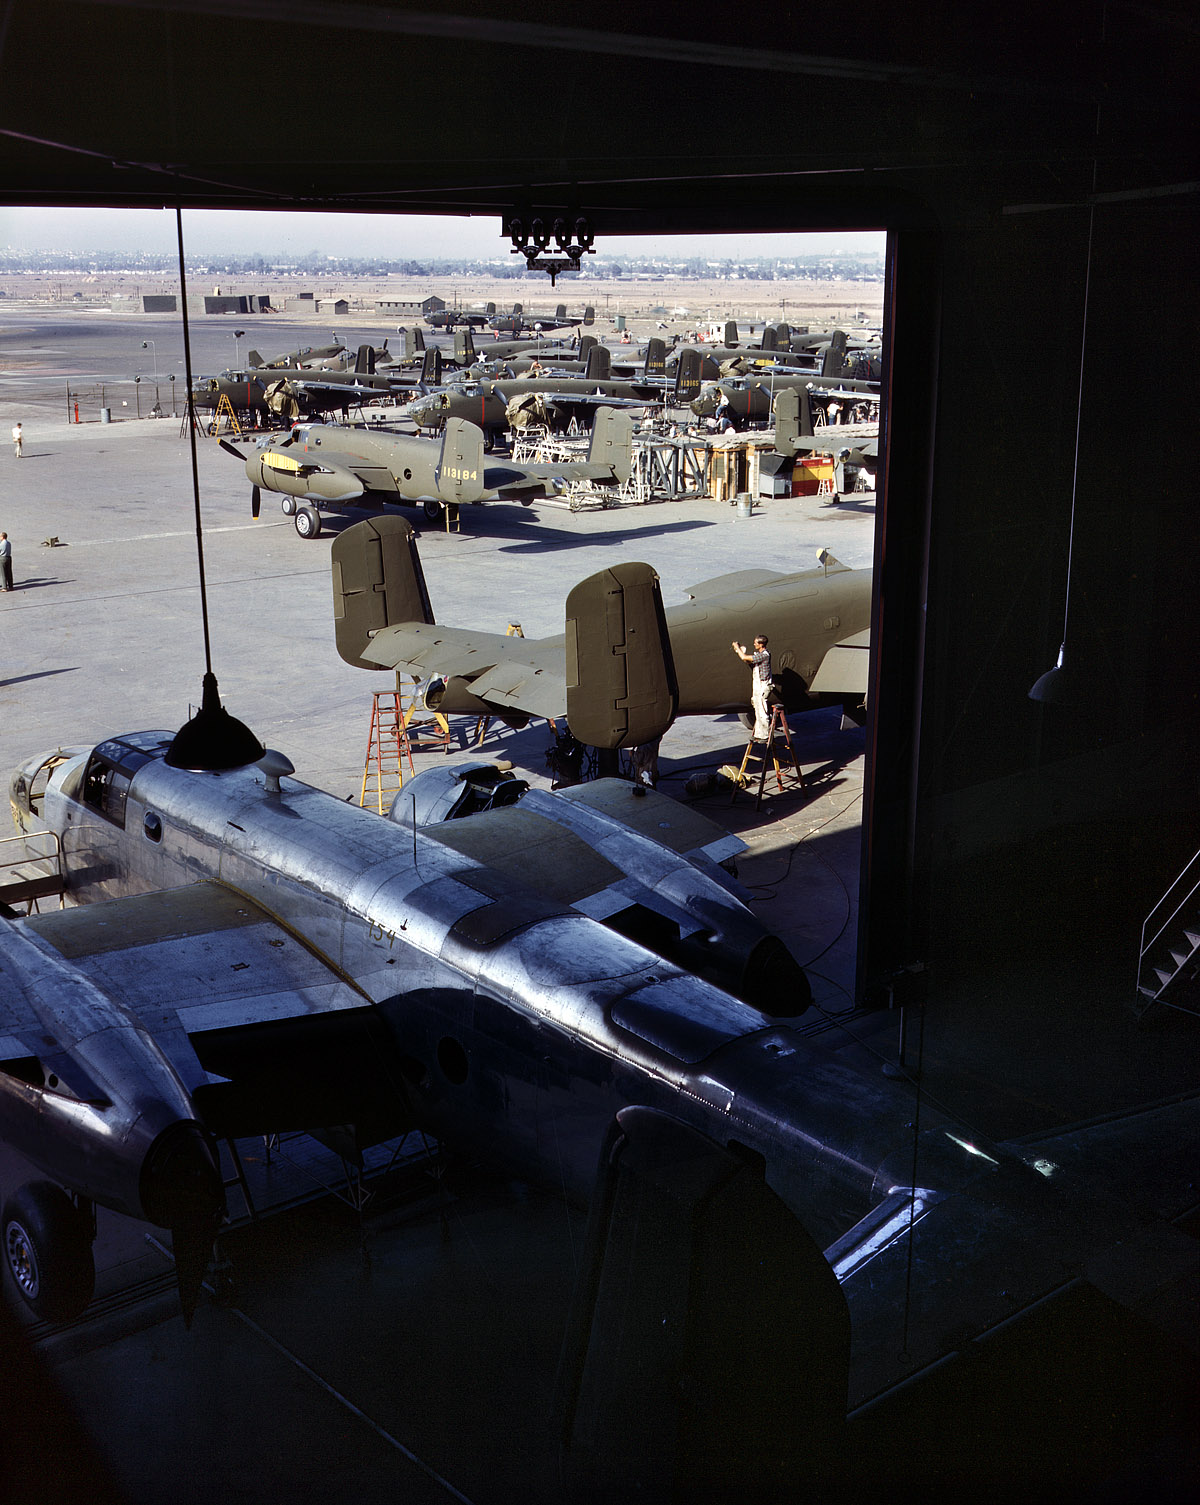 October 1942. "Another B-25 bomber rolls off the final assembly line to join other ships in the outdoor assembly area. North American Aviation Inc. Inglewood, California." View full size. 4x5 Kodachrome transparency by Alfred Palmer.